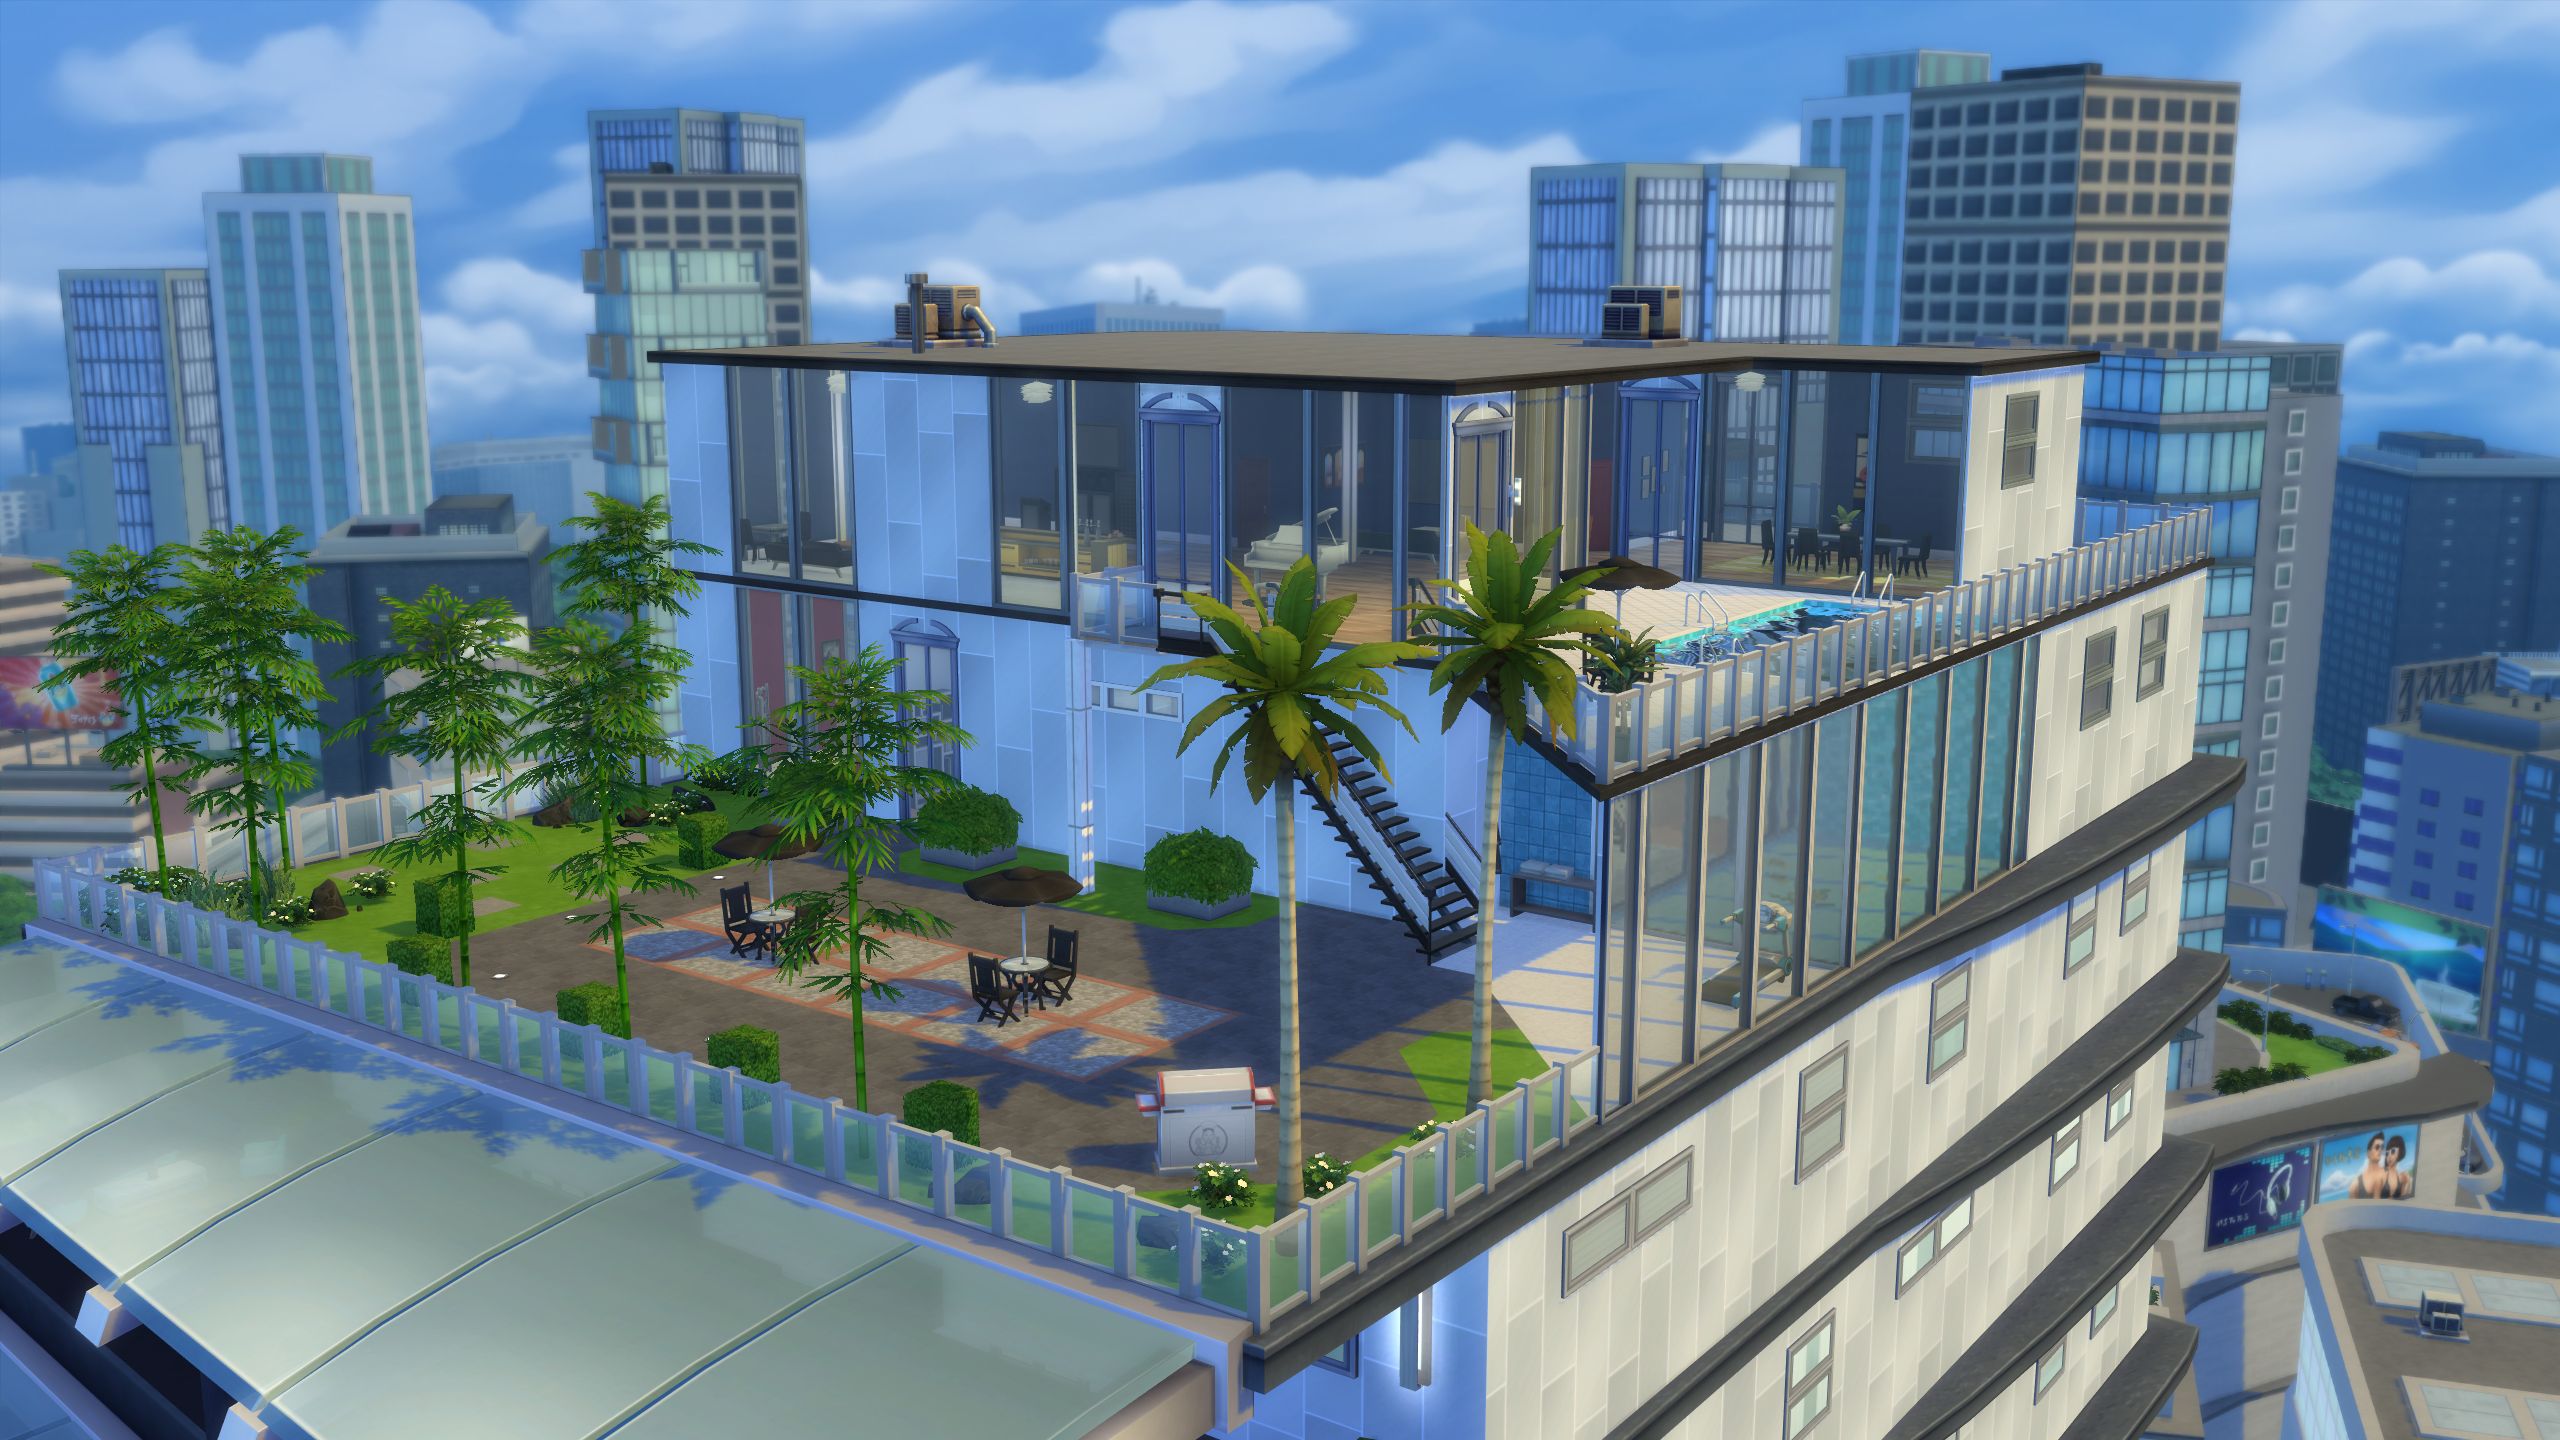 The Sims 4 City Living Apartments Guide